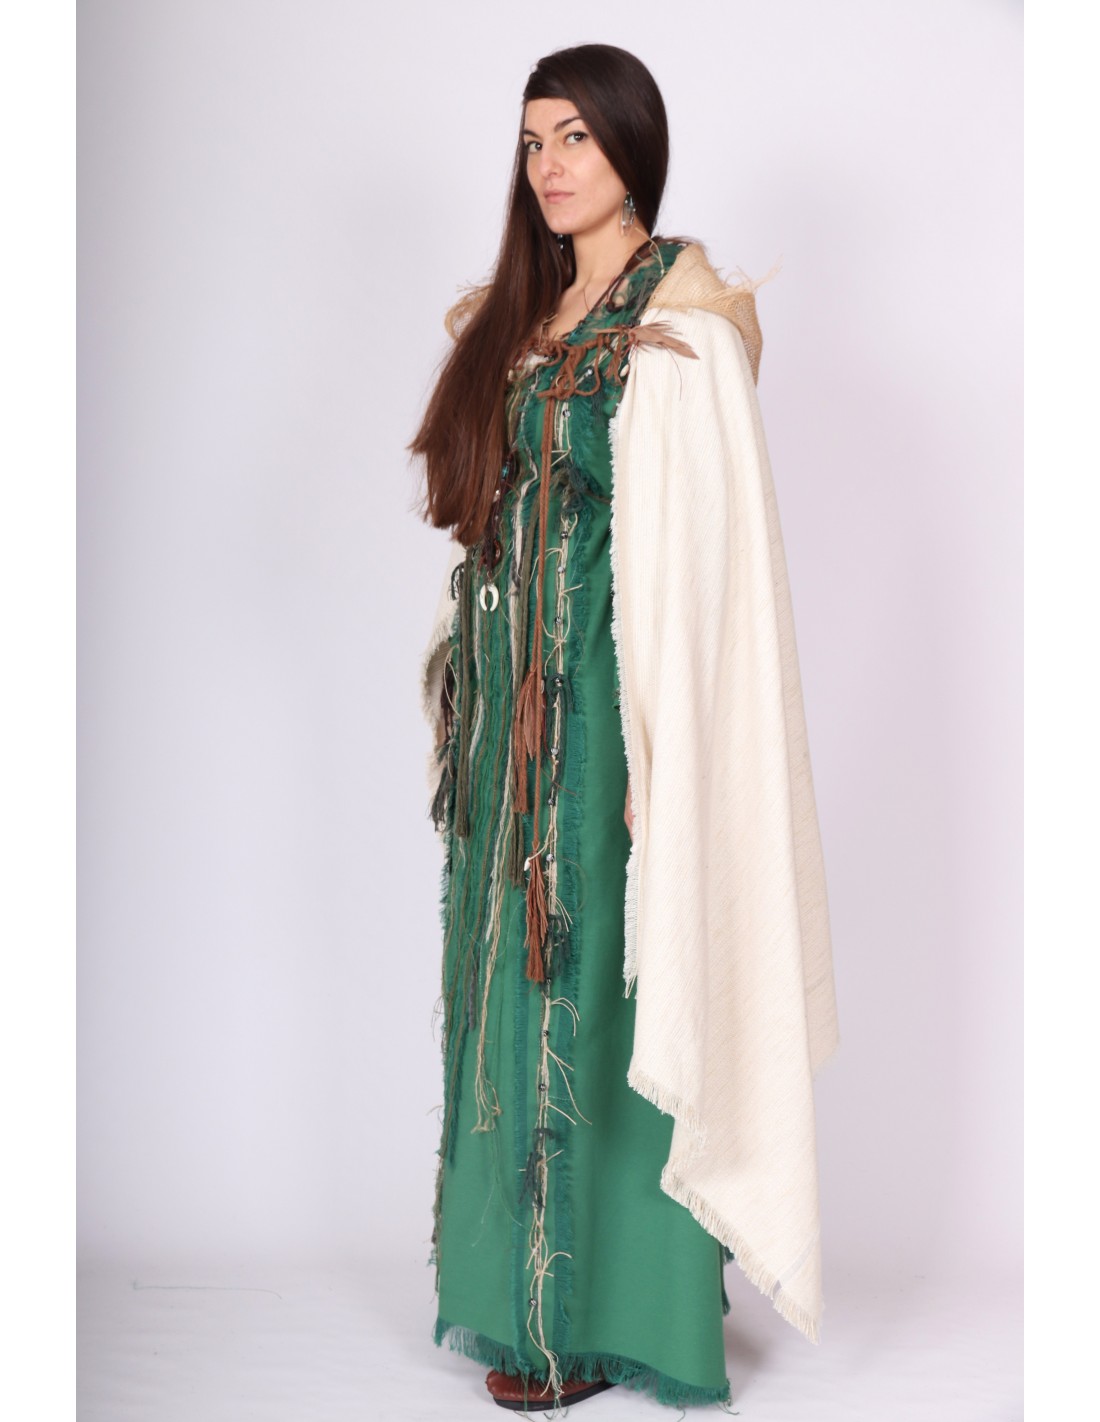 Celtic dress lady of the forest